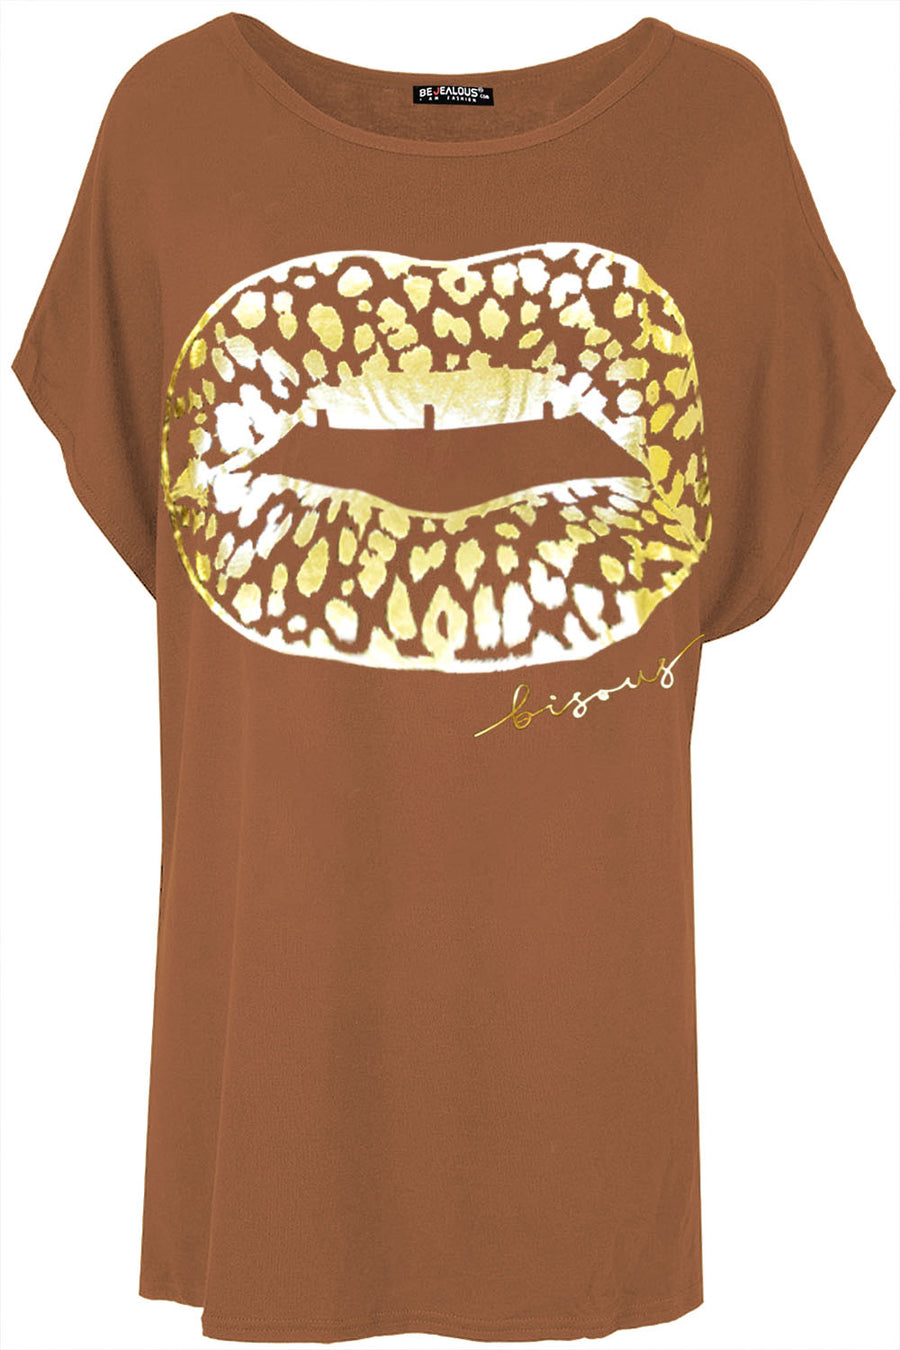 Lips Gold Foil Printed Batwing Oversized T Shirt